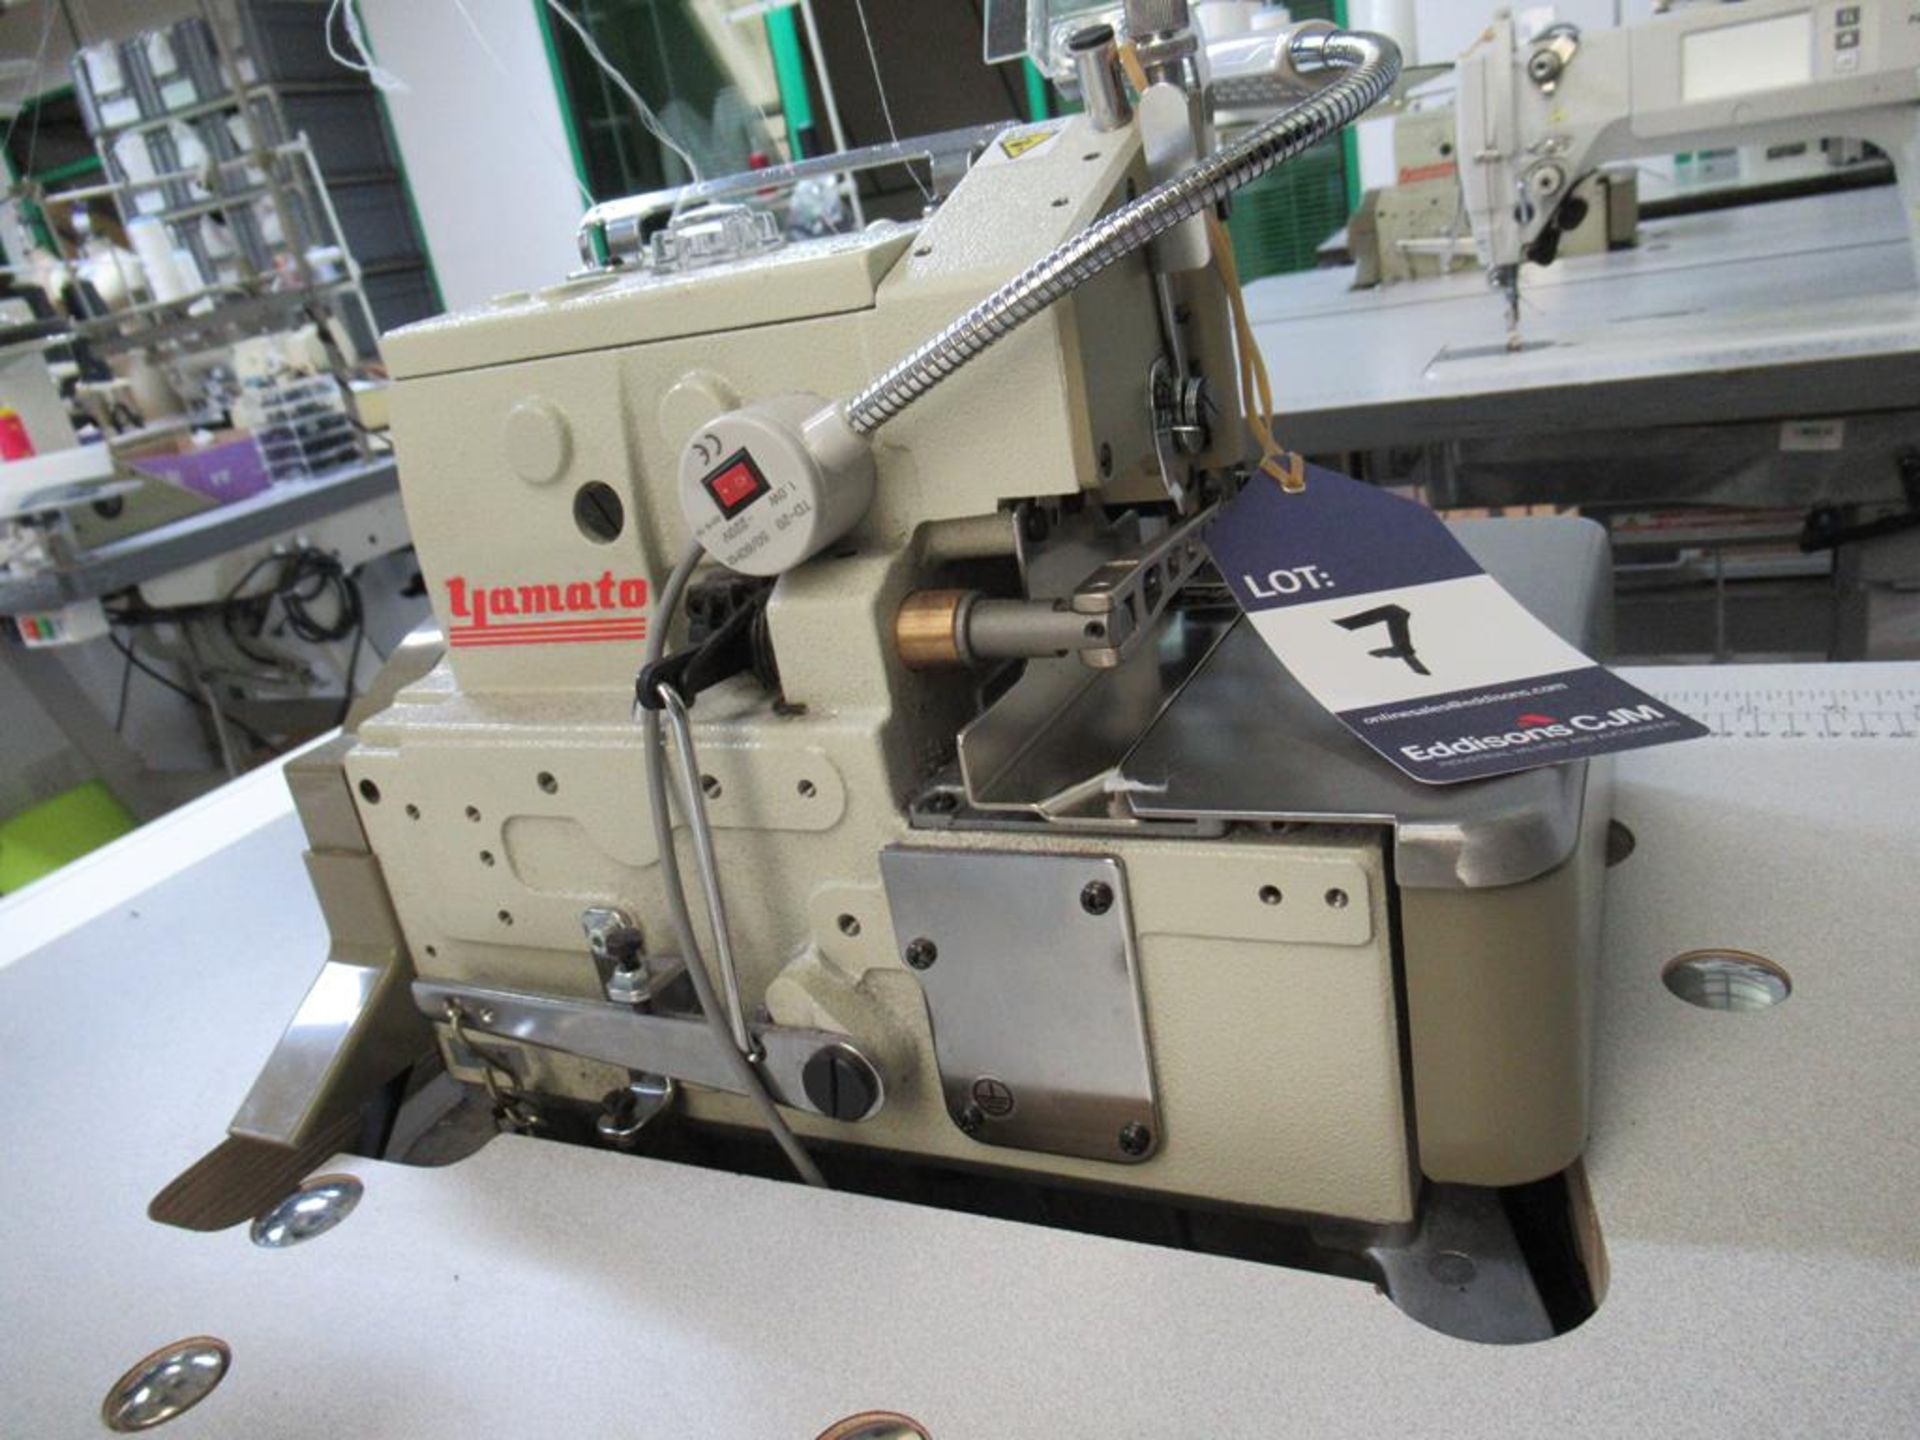 A Yamato CZ6020-Y6DF 2 Needle 4 Thread Over Lock Industrial Sewing Machine complete with Table - Image 4 of 5